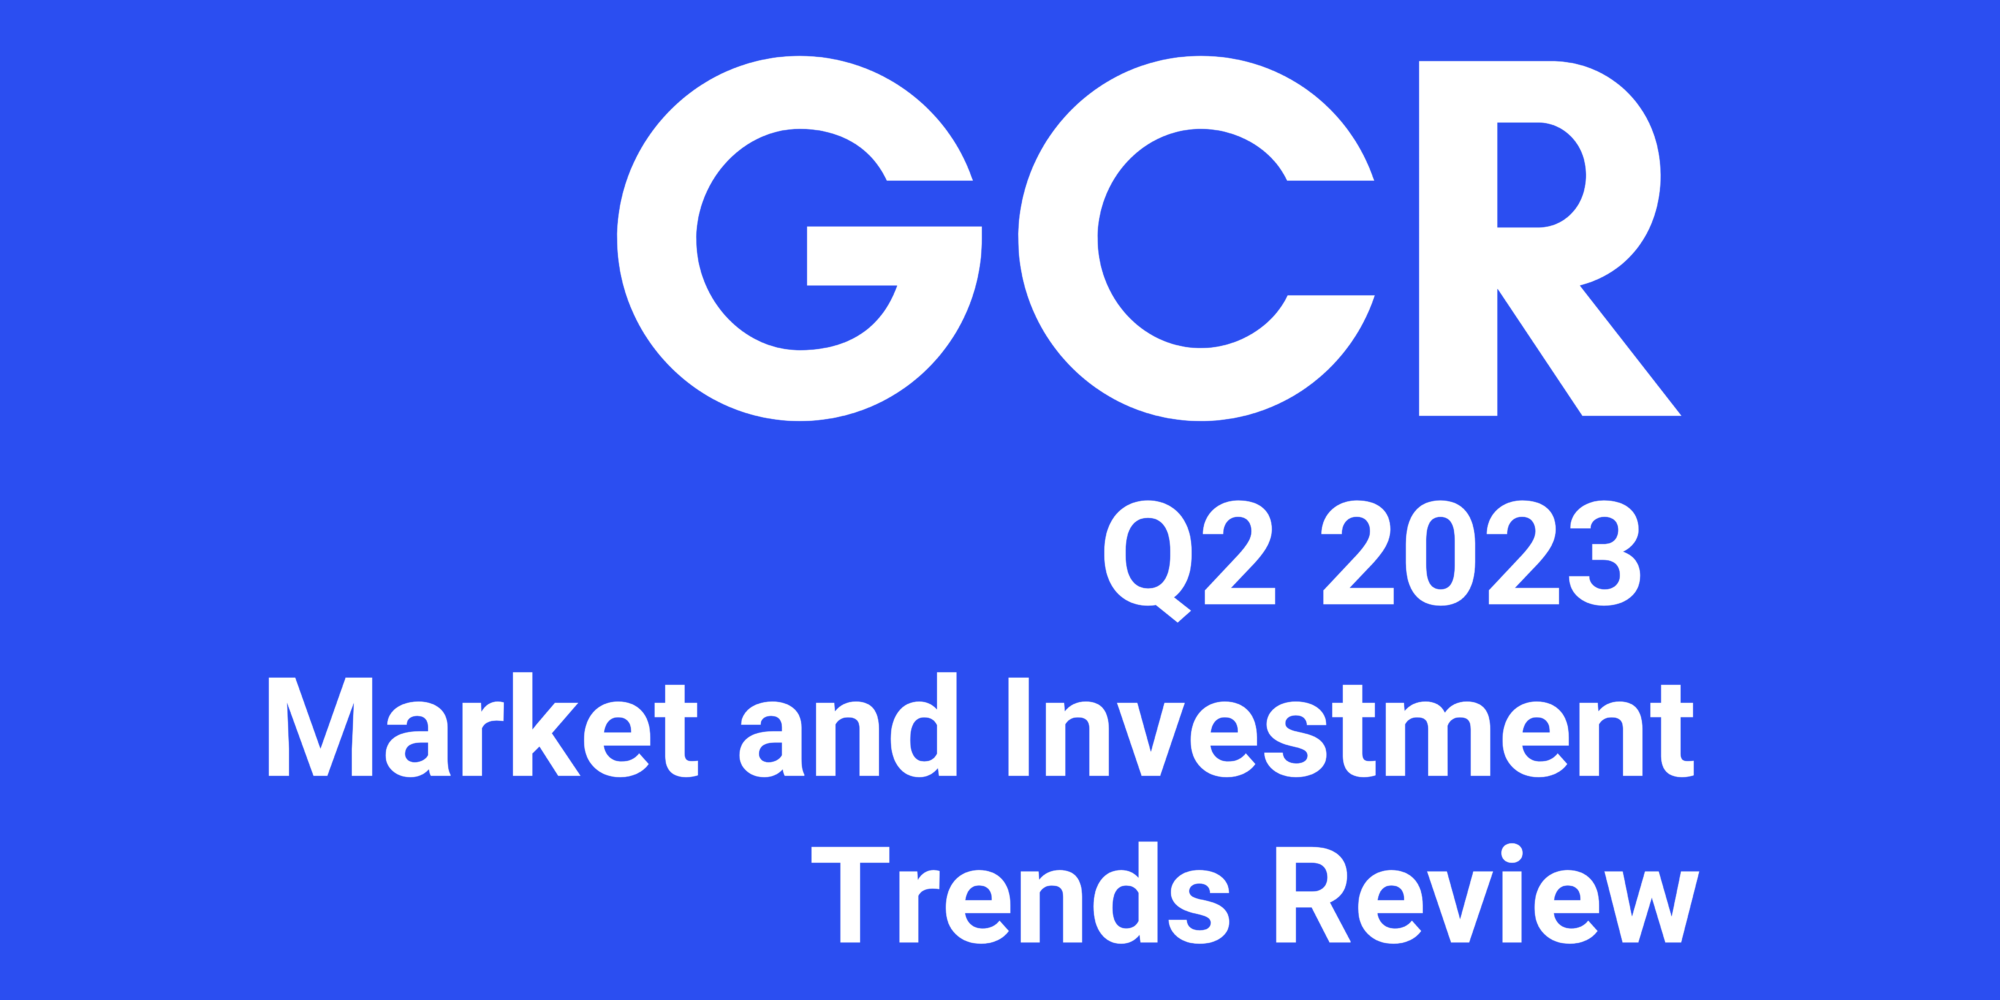 GCR Market and Investment Trends Review – Q2 2023